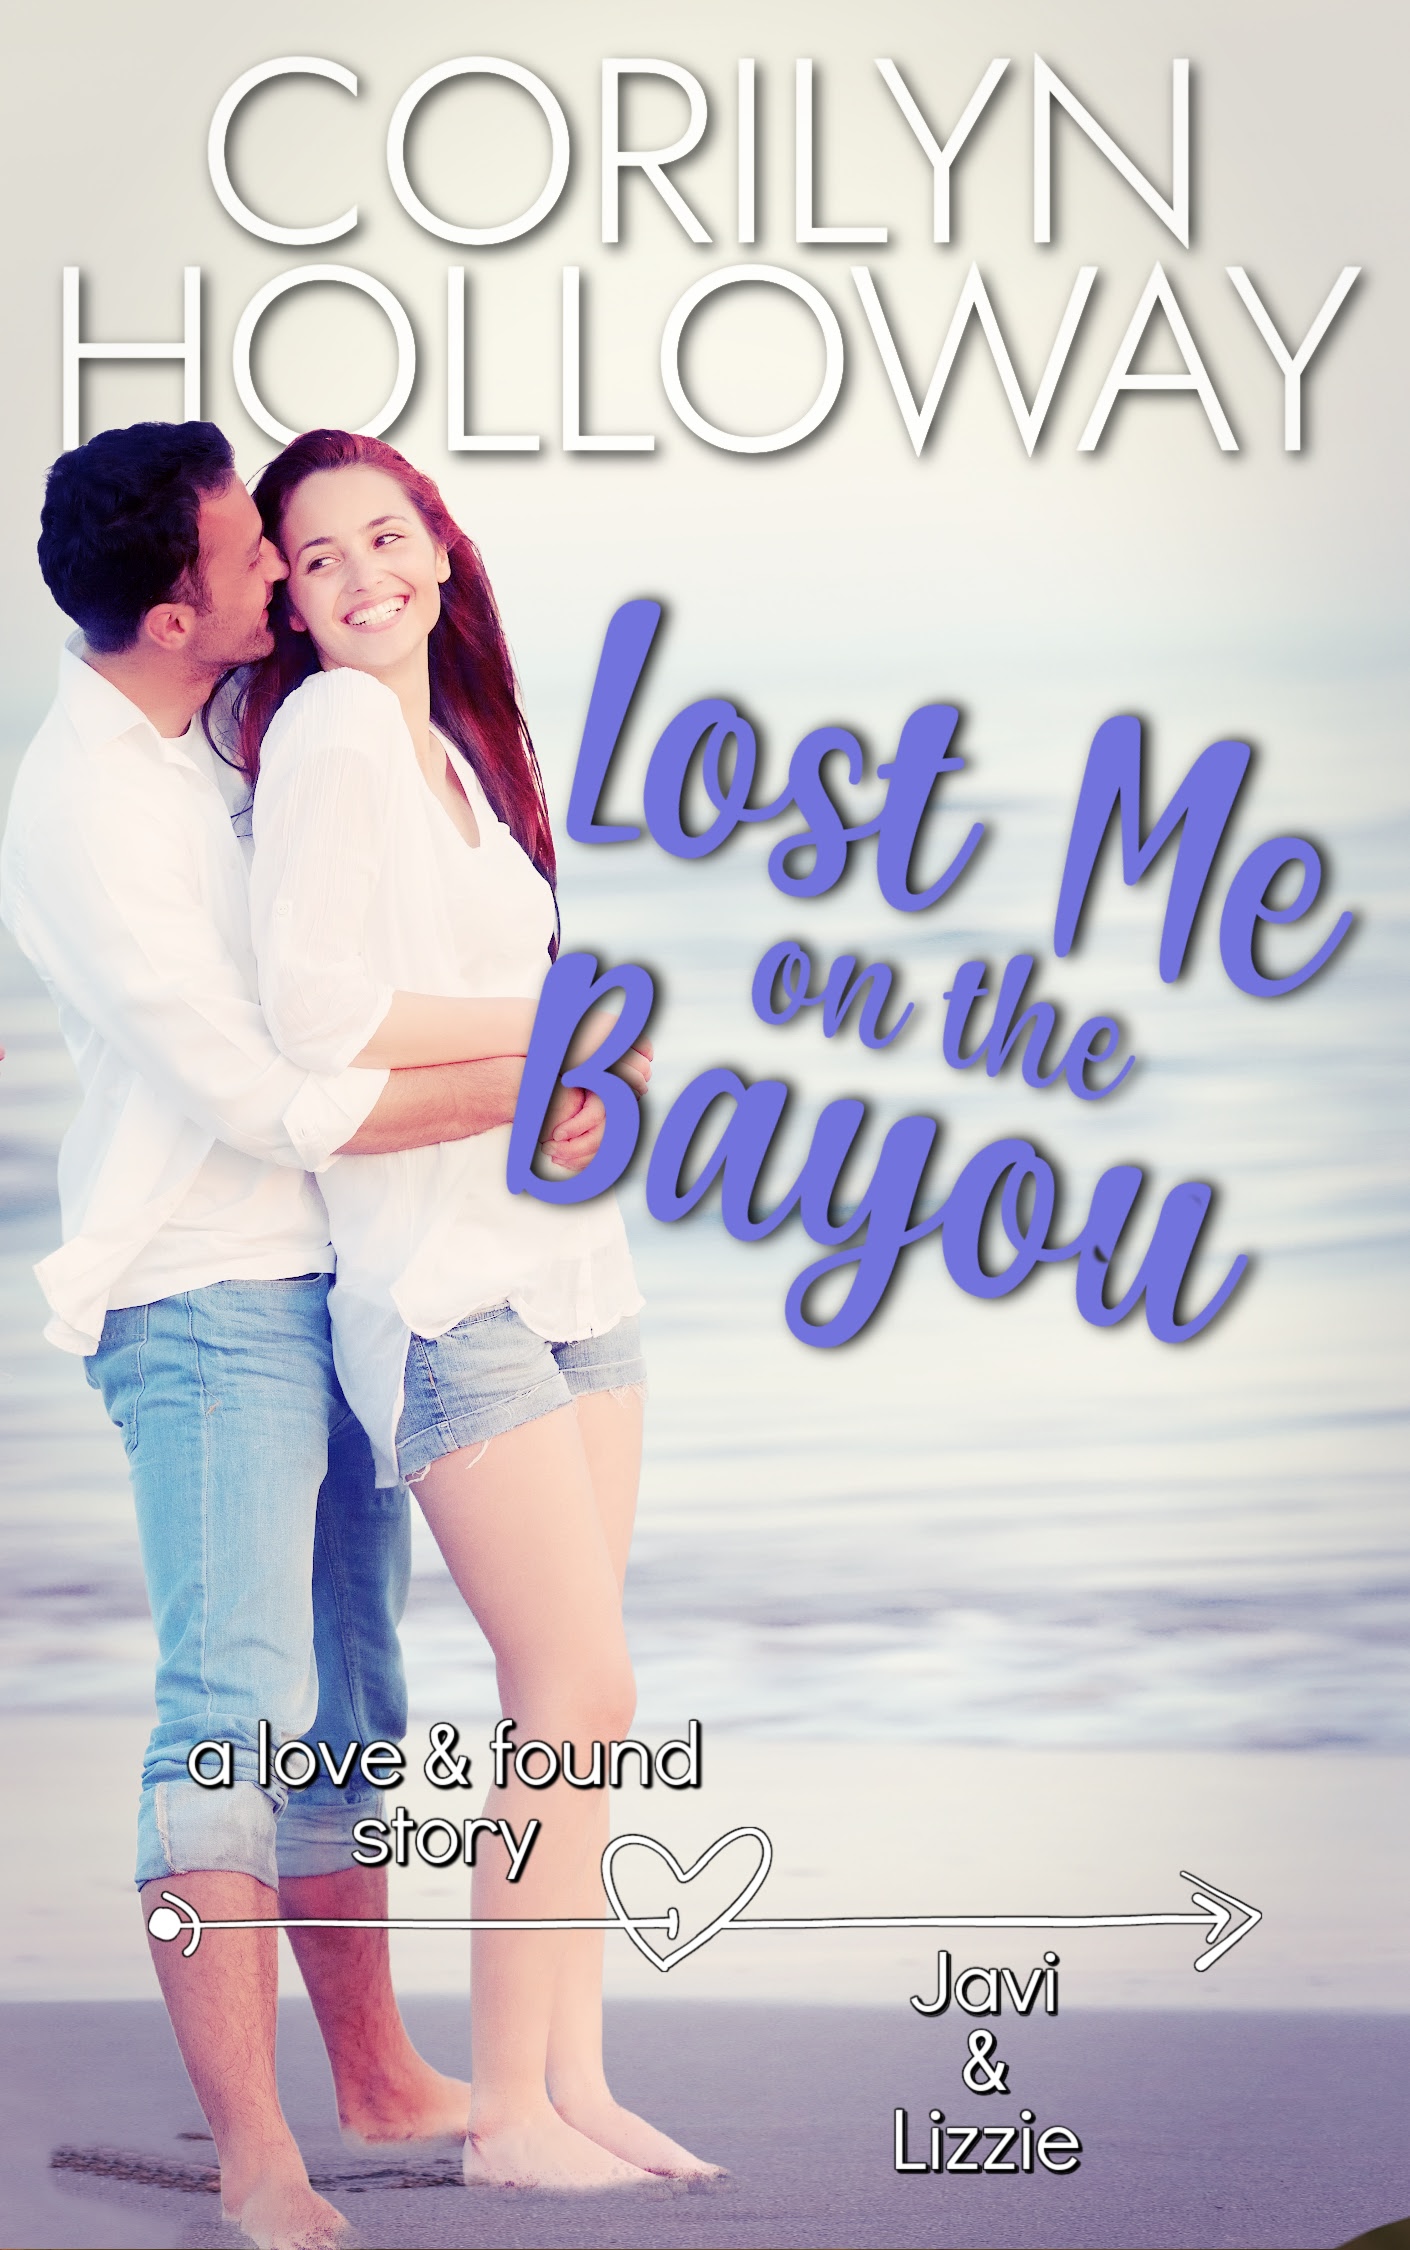 Lose Me on the Bayou copy 4 (2)